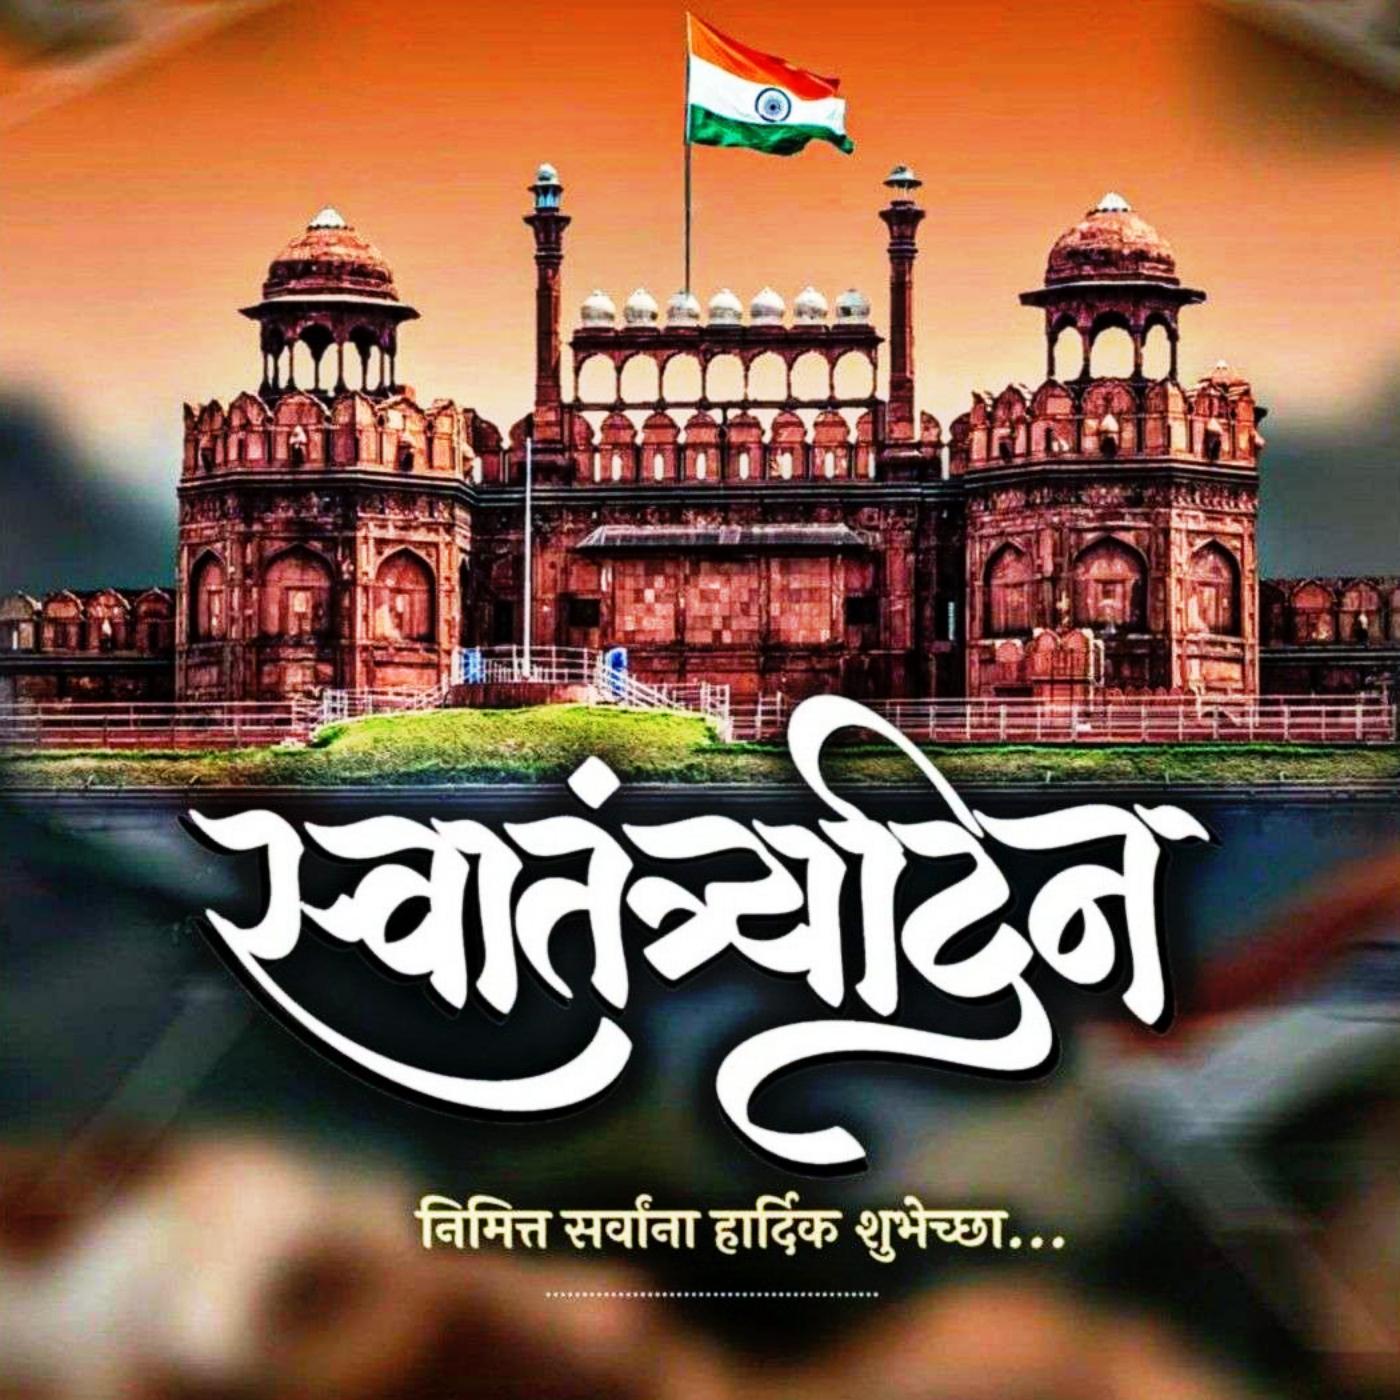 Happy Independence Day Images in Marathi